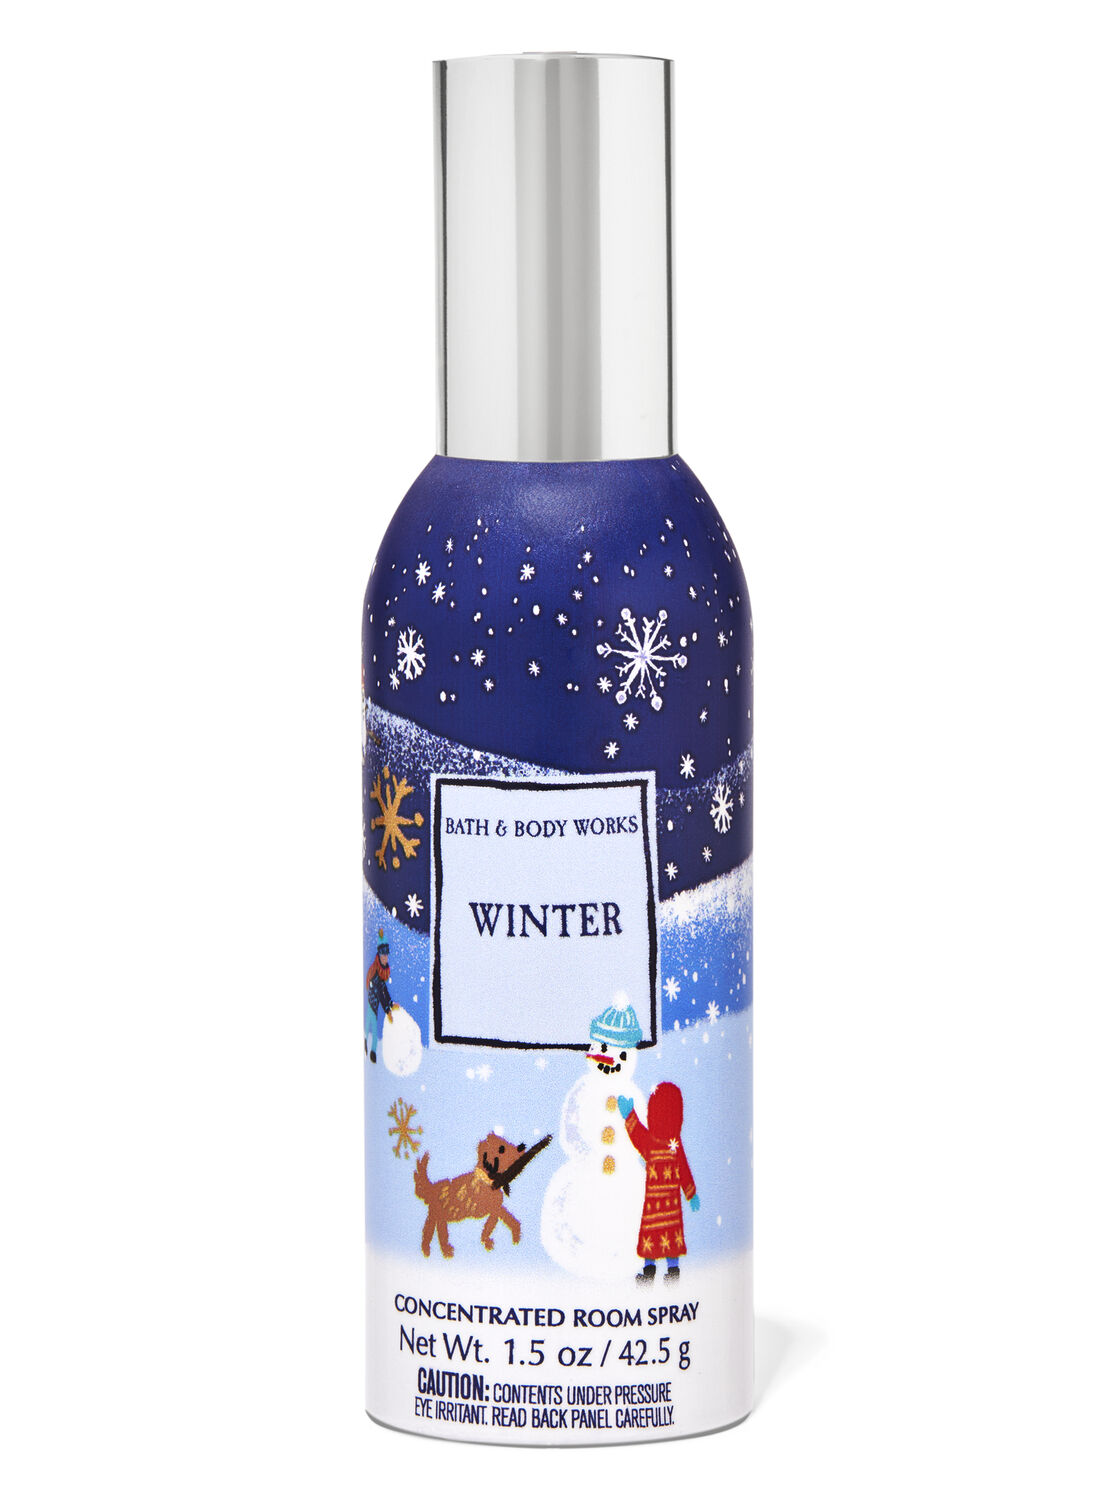 Winter Concentrated Room Spray